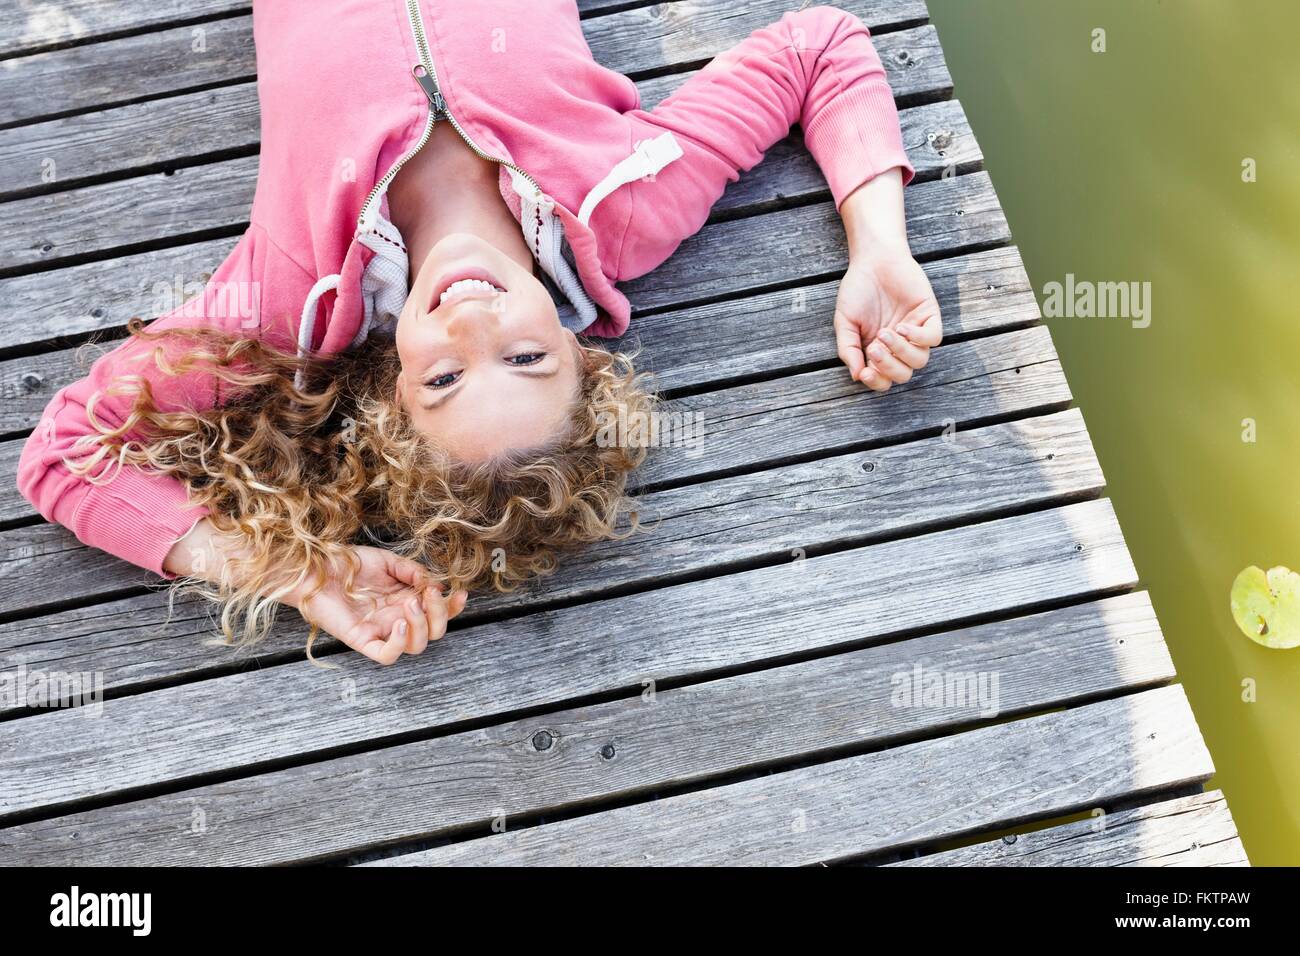 Young woman lying on decking en bois smiling to camera Banque D'Images